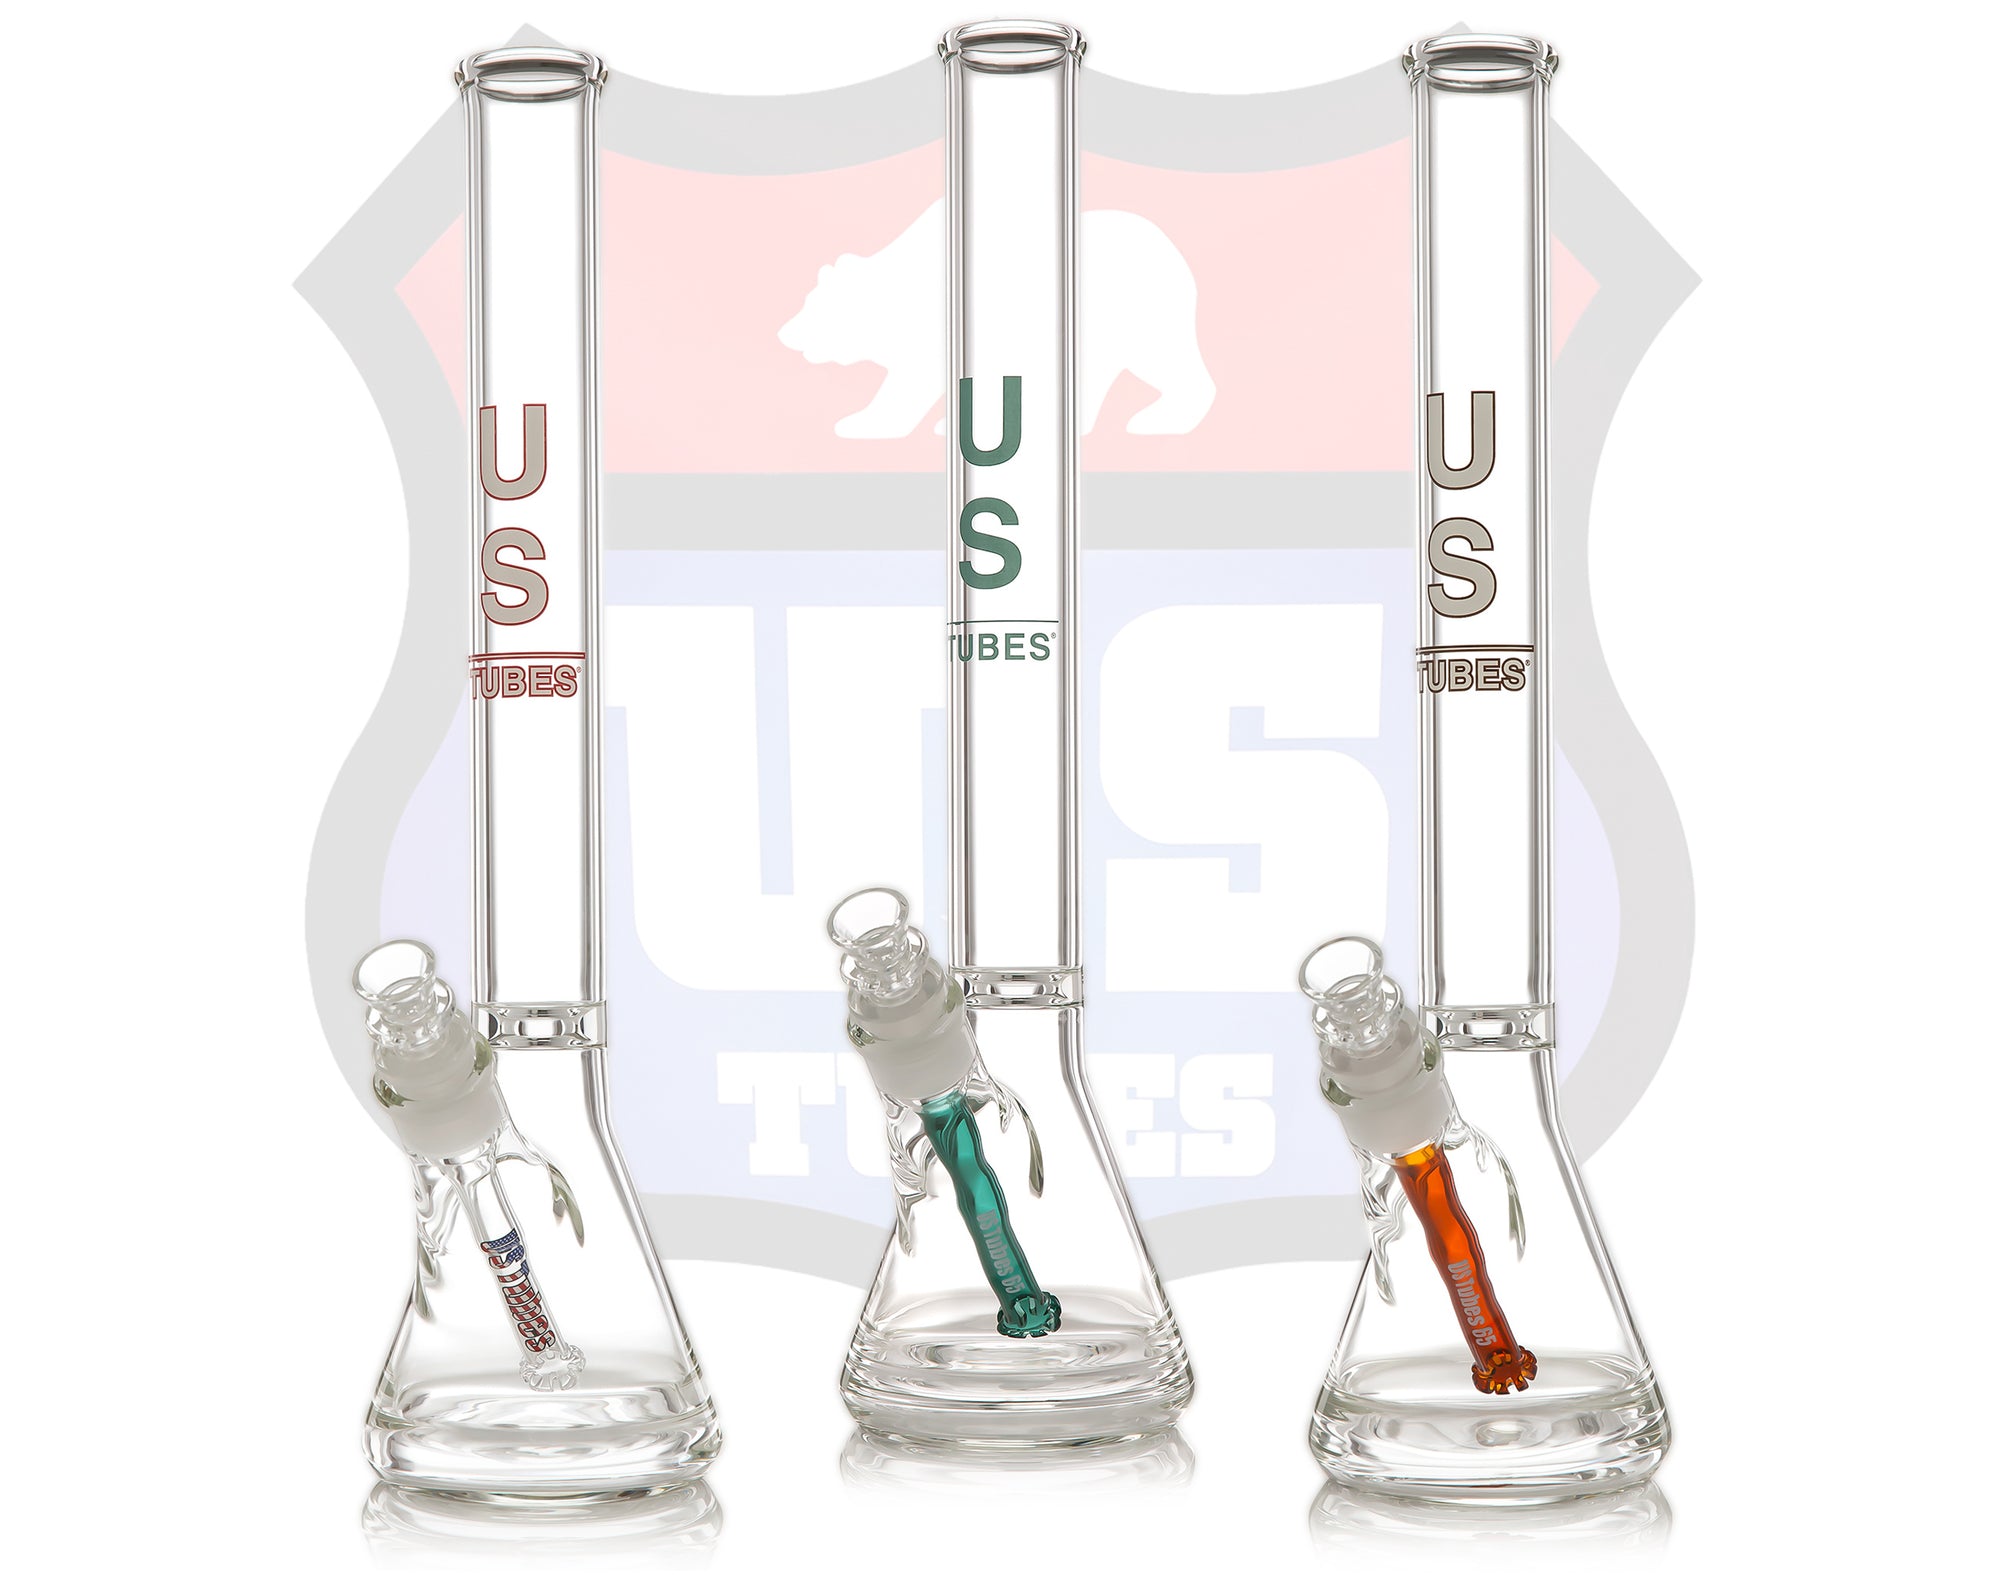 Three Tall US TUBES in front of a faint US TUBES logo